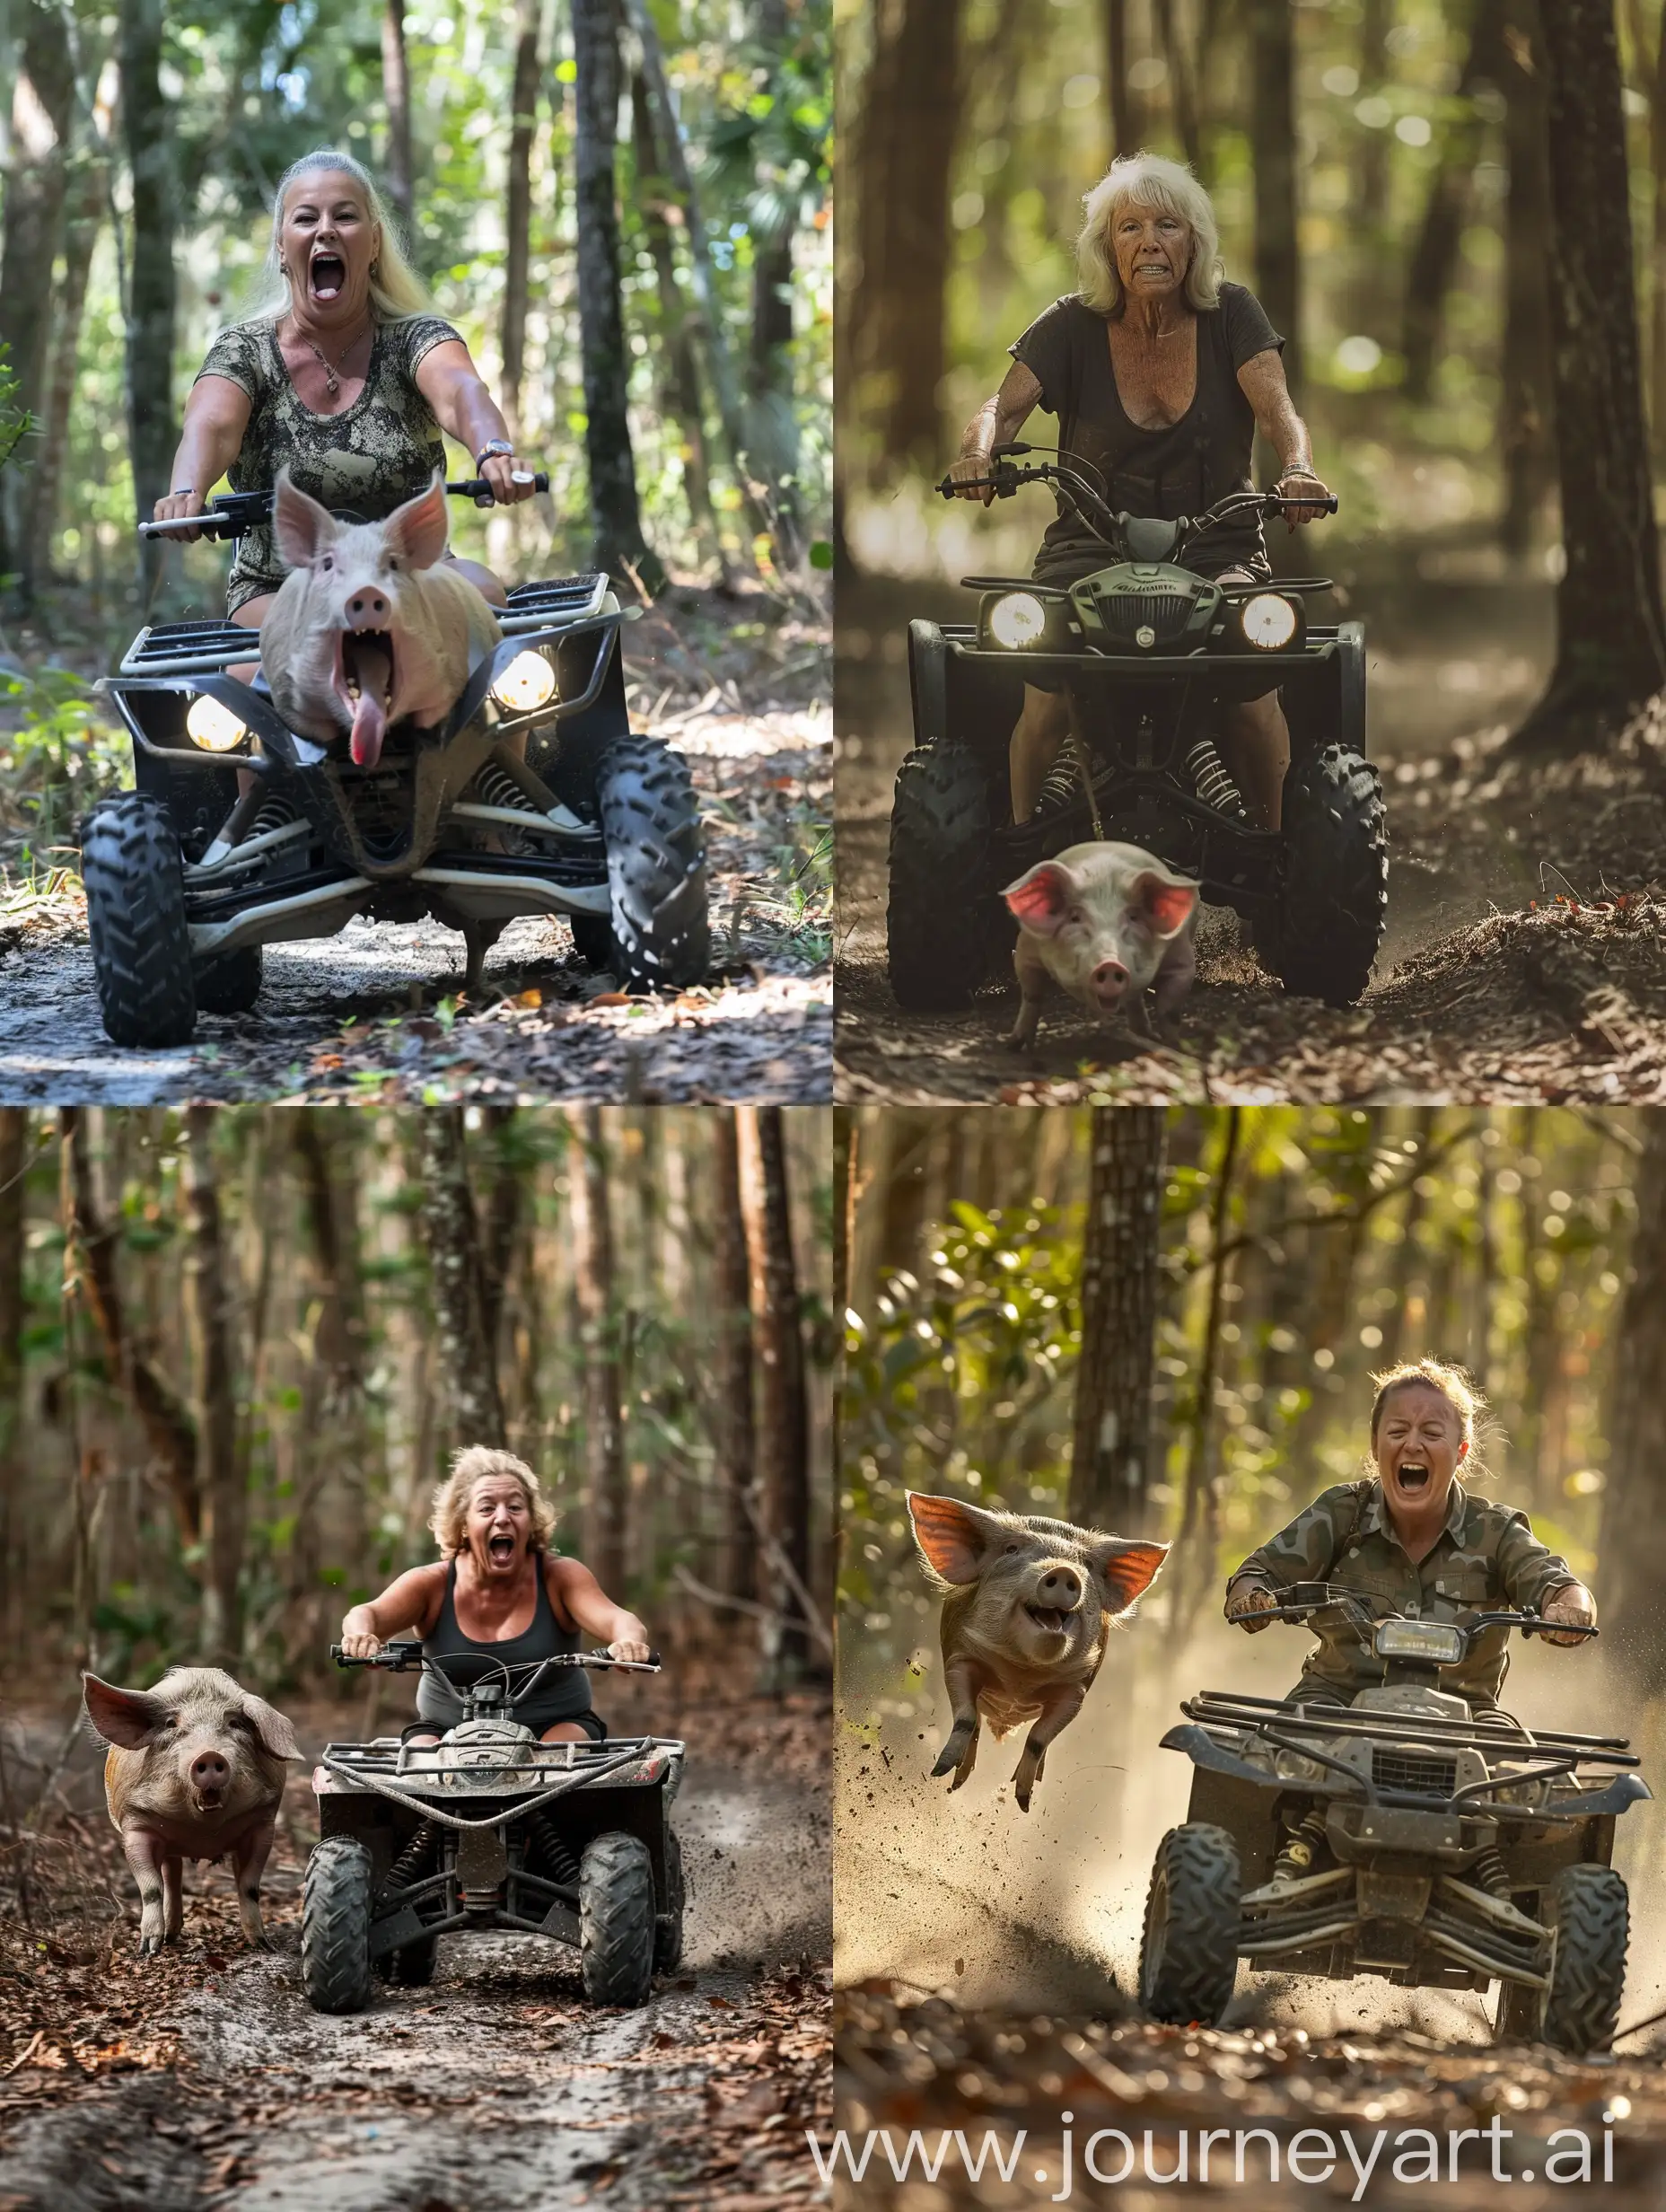 Florida 60 year old white female average build with smooth skin and a small mouth riding a 4 wheeler ATV in the woods of Florida chasing a hog.
